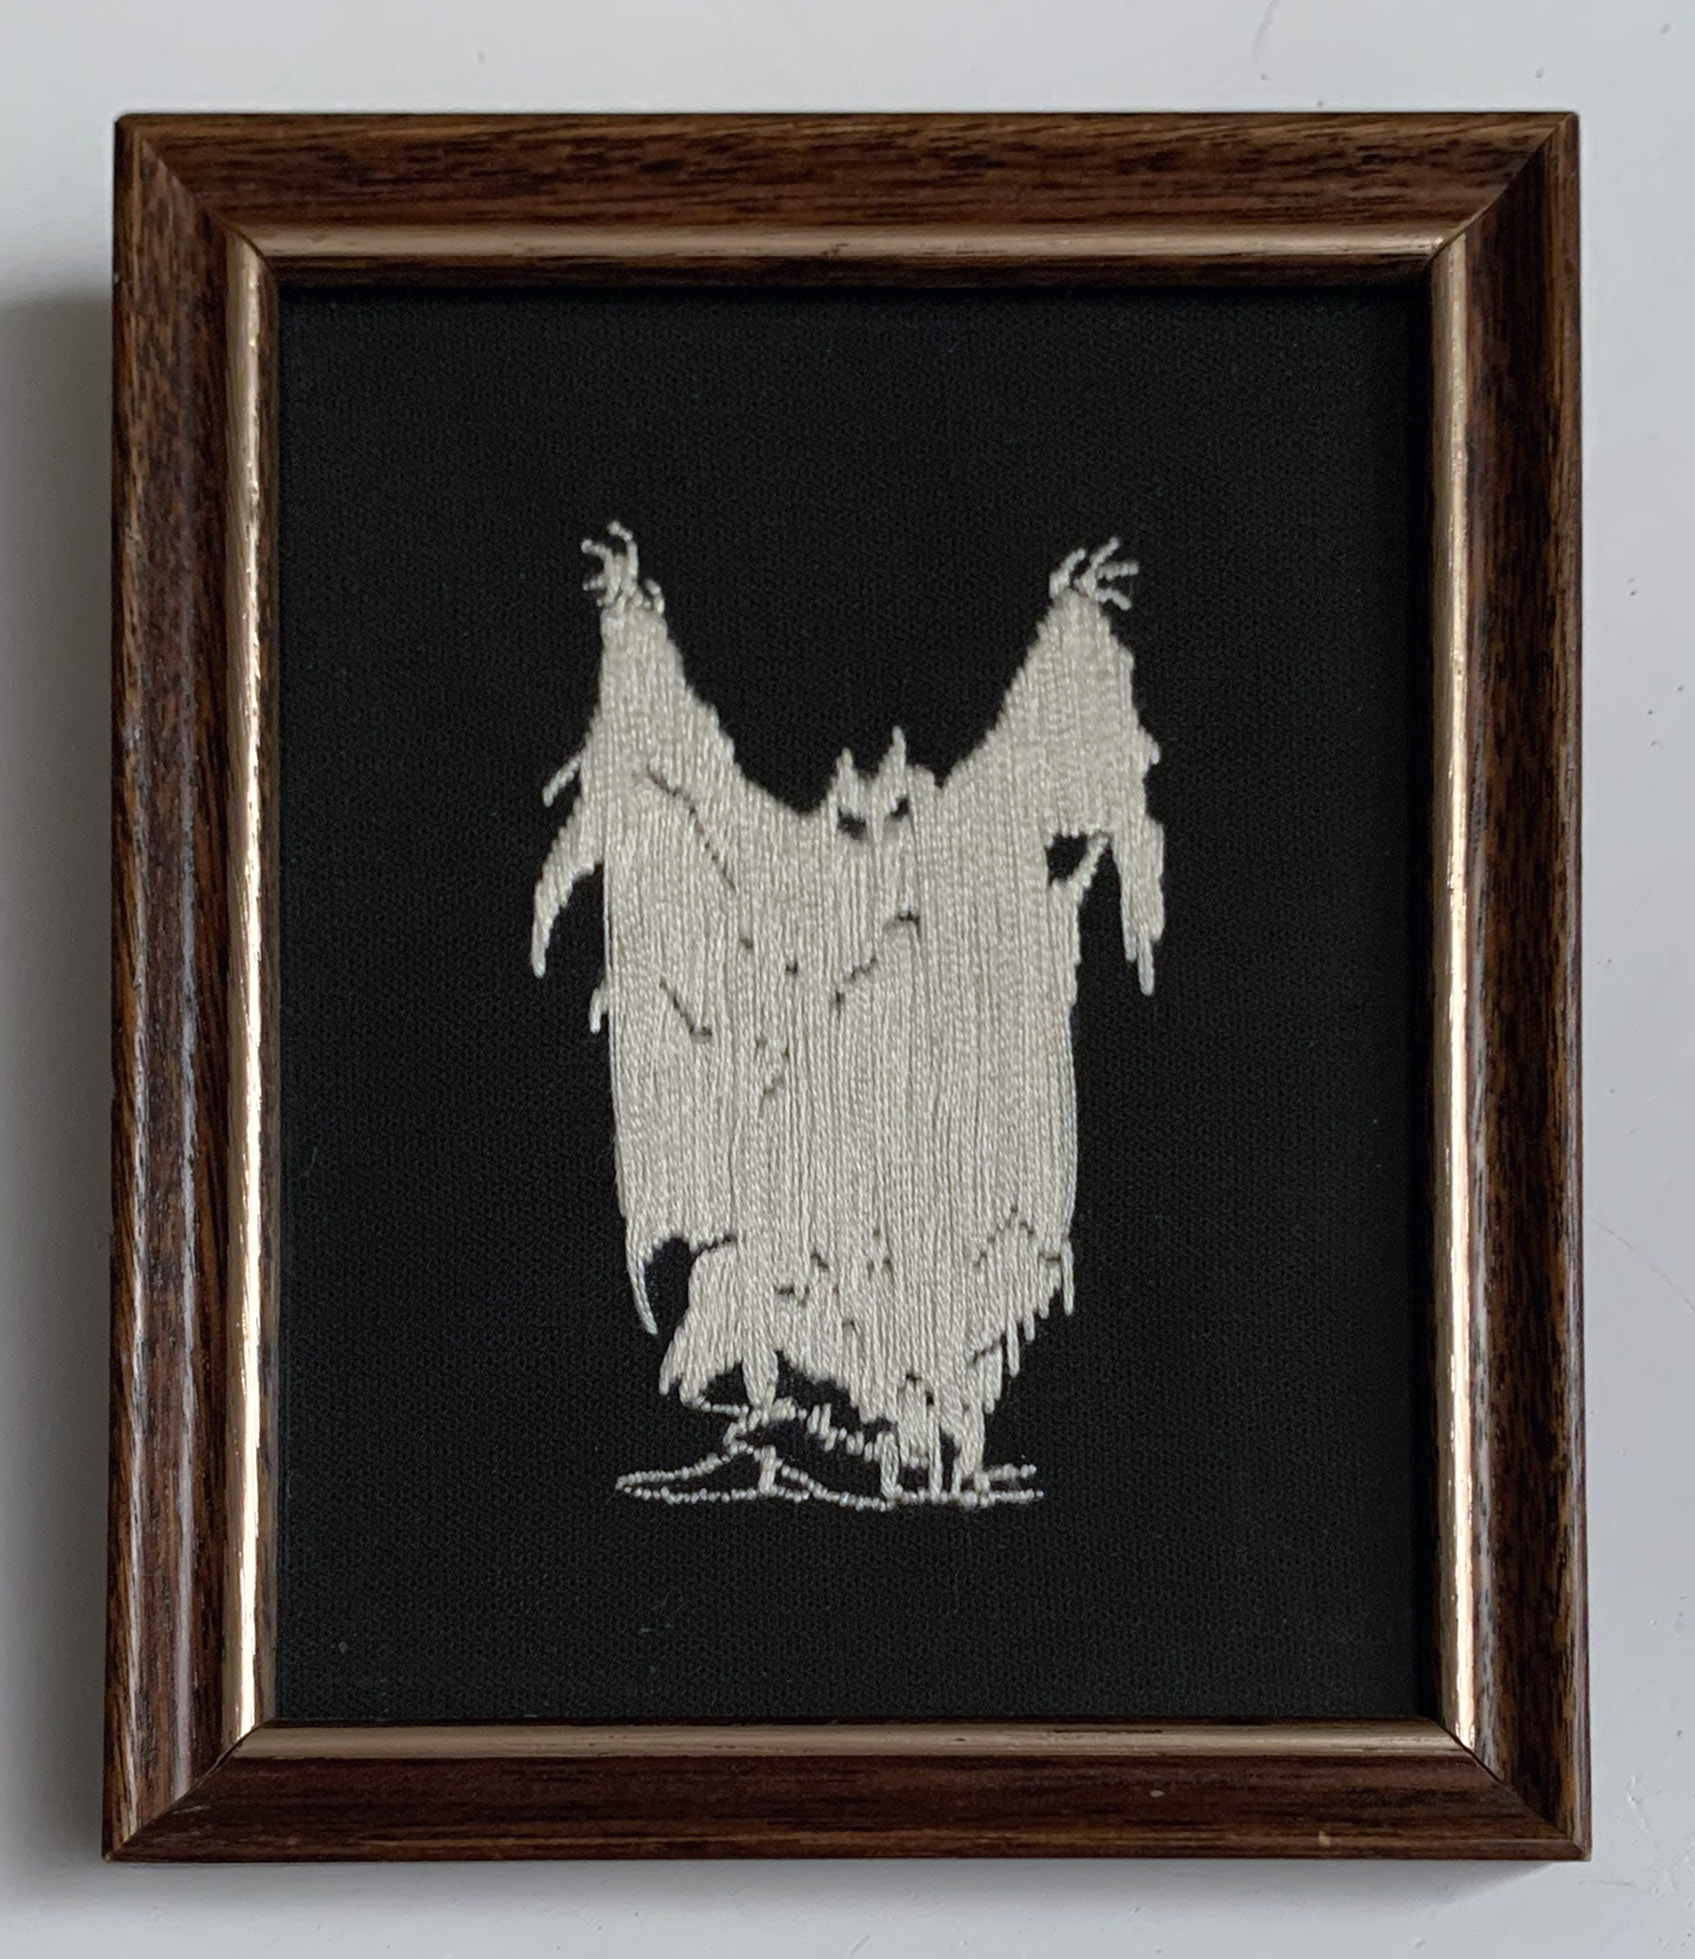  / Embroidery from an illustration of a vampire (possibly Thuringwethil) from the Middle-earth Role-Playing game. Art by artist Marine Beaufils.